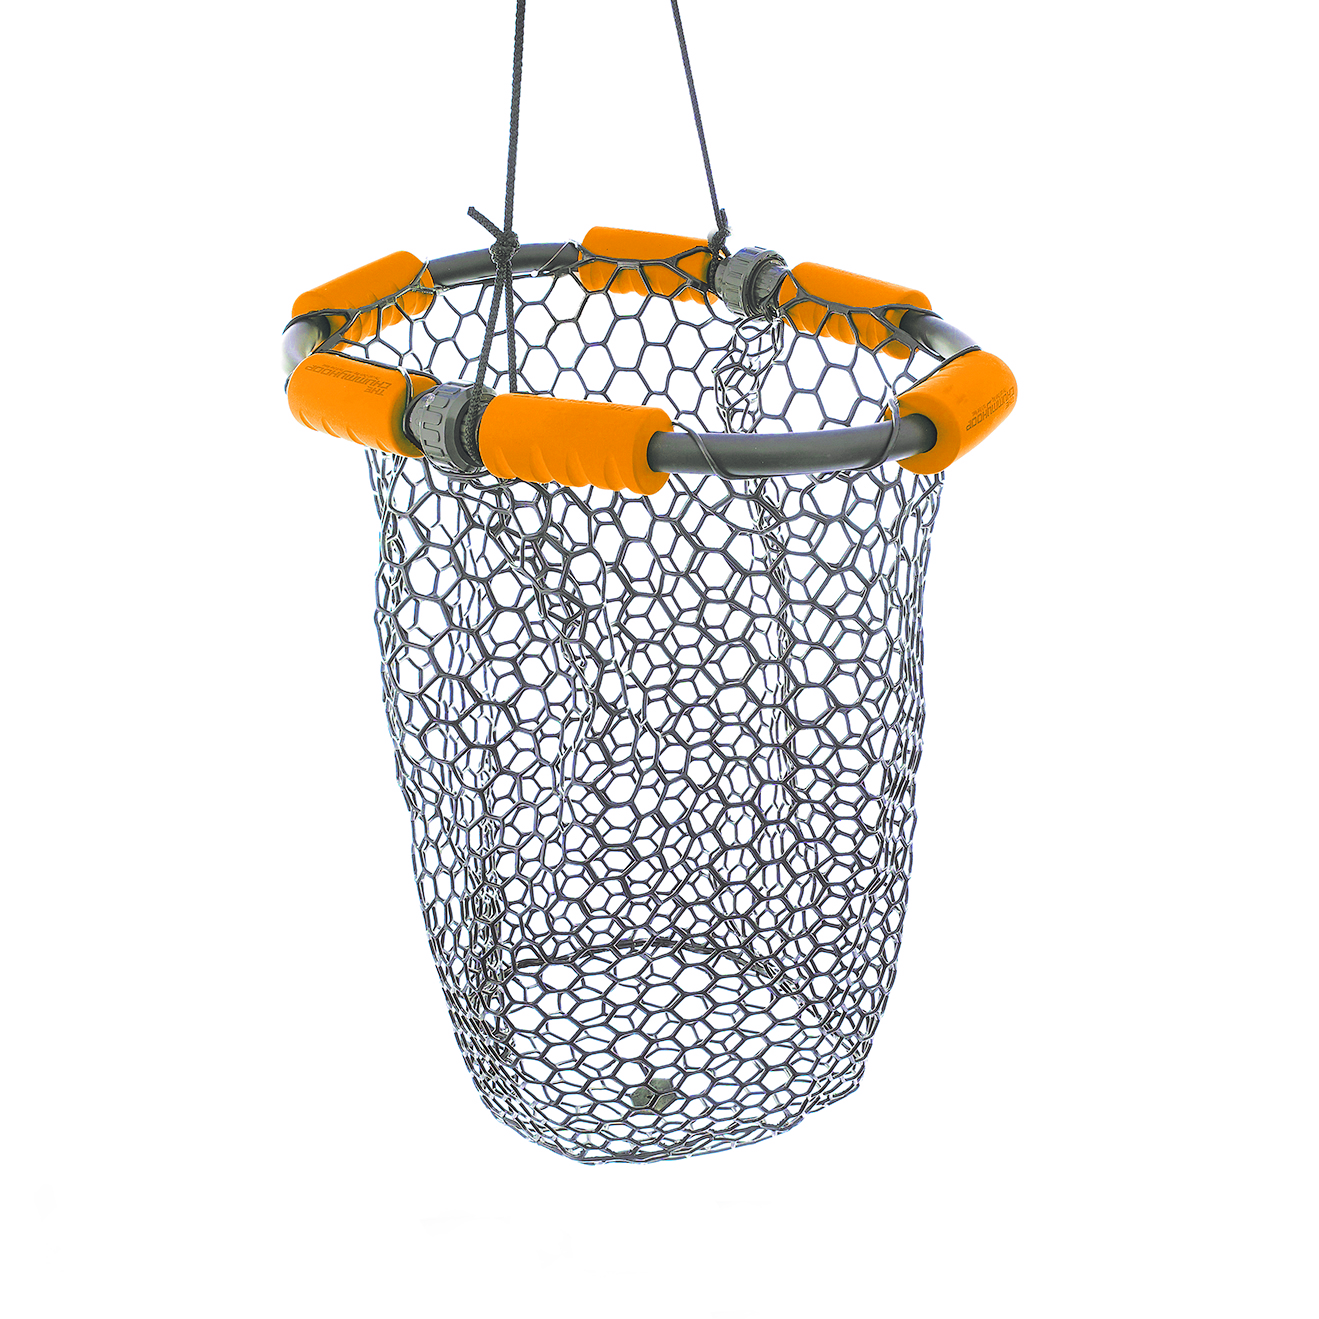 3pcs Products Chum Bag Fishing Net Attract Game Fish Clam Bag Bait  Container Draw String Mesh Sack Shell Collector Fishing Supplies Random  Color